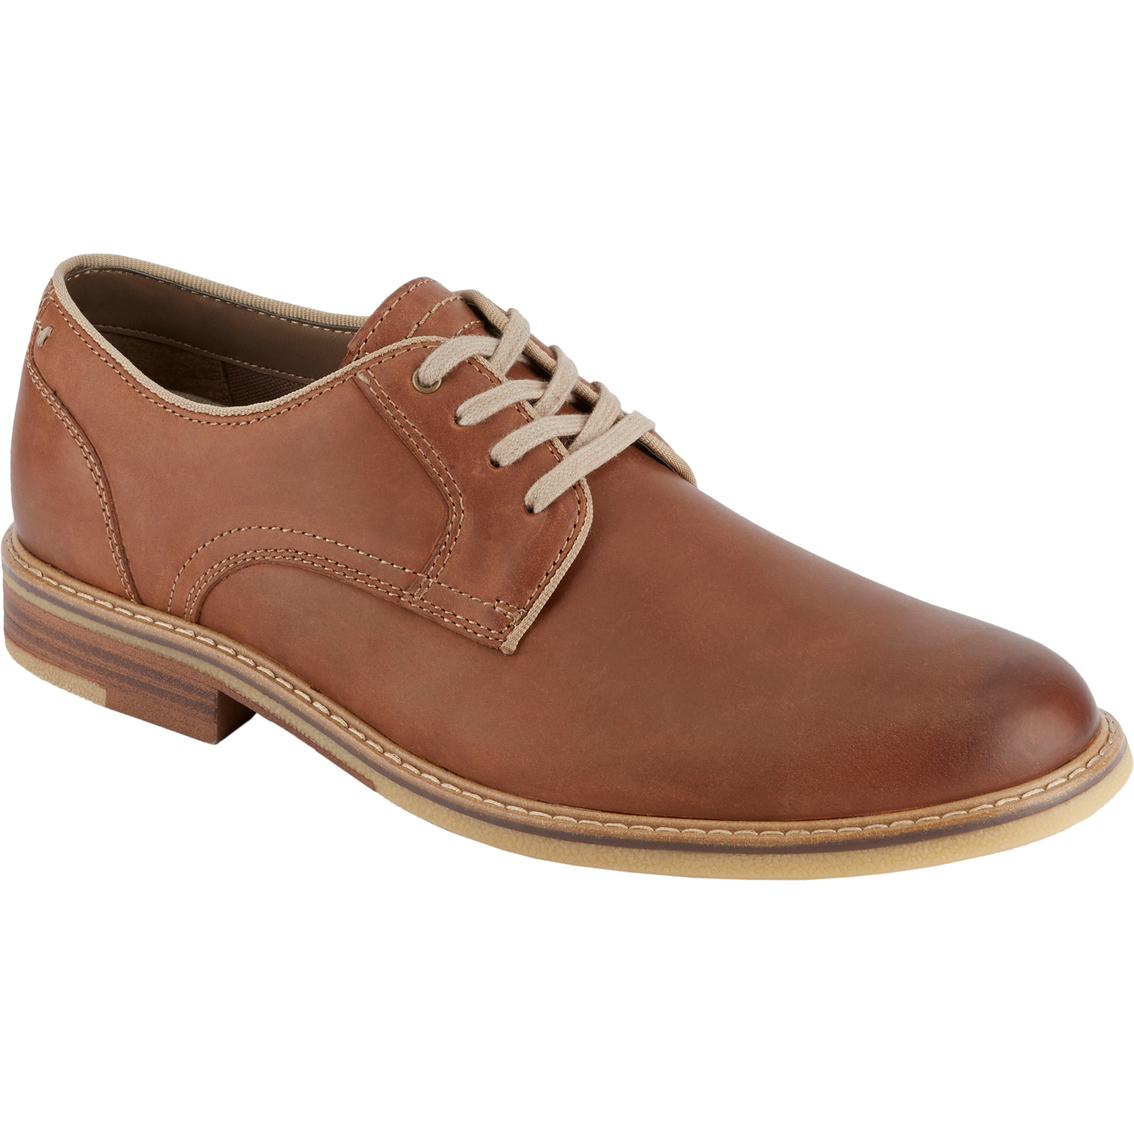 Dockers Martin Oxford Shoes